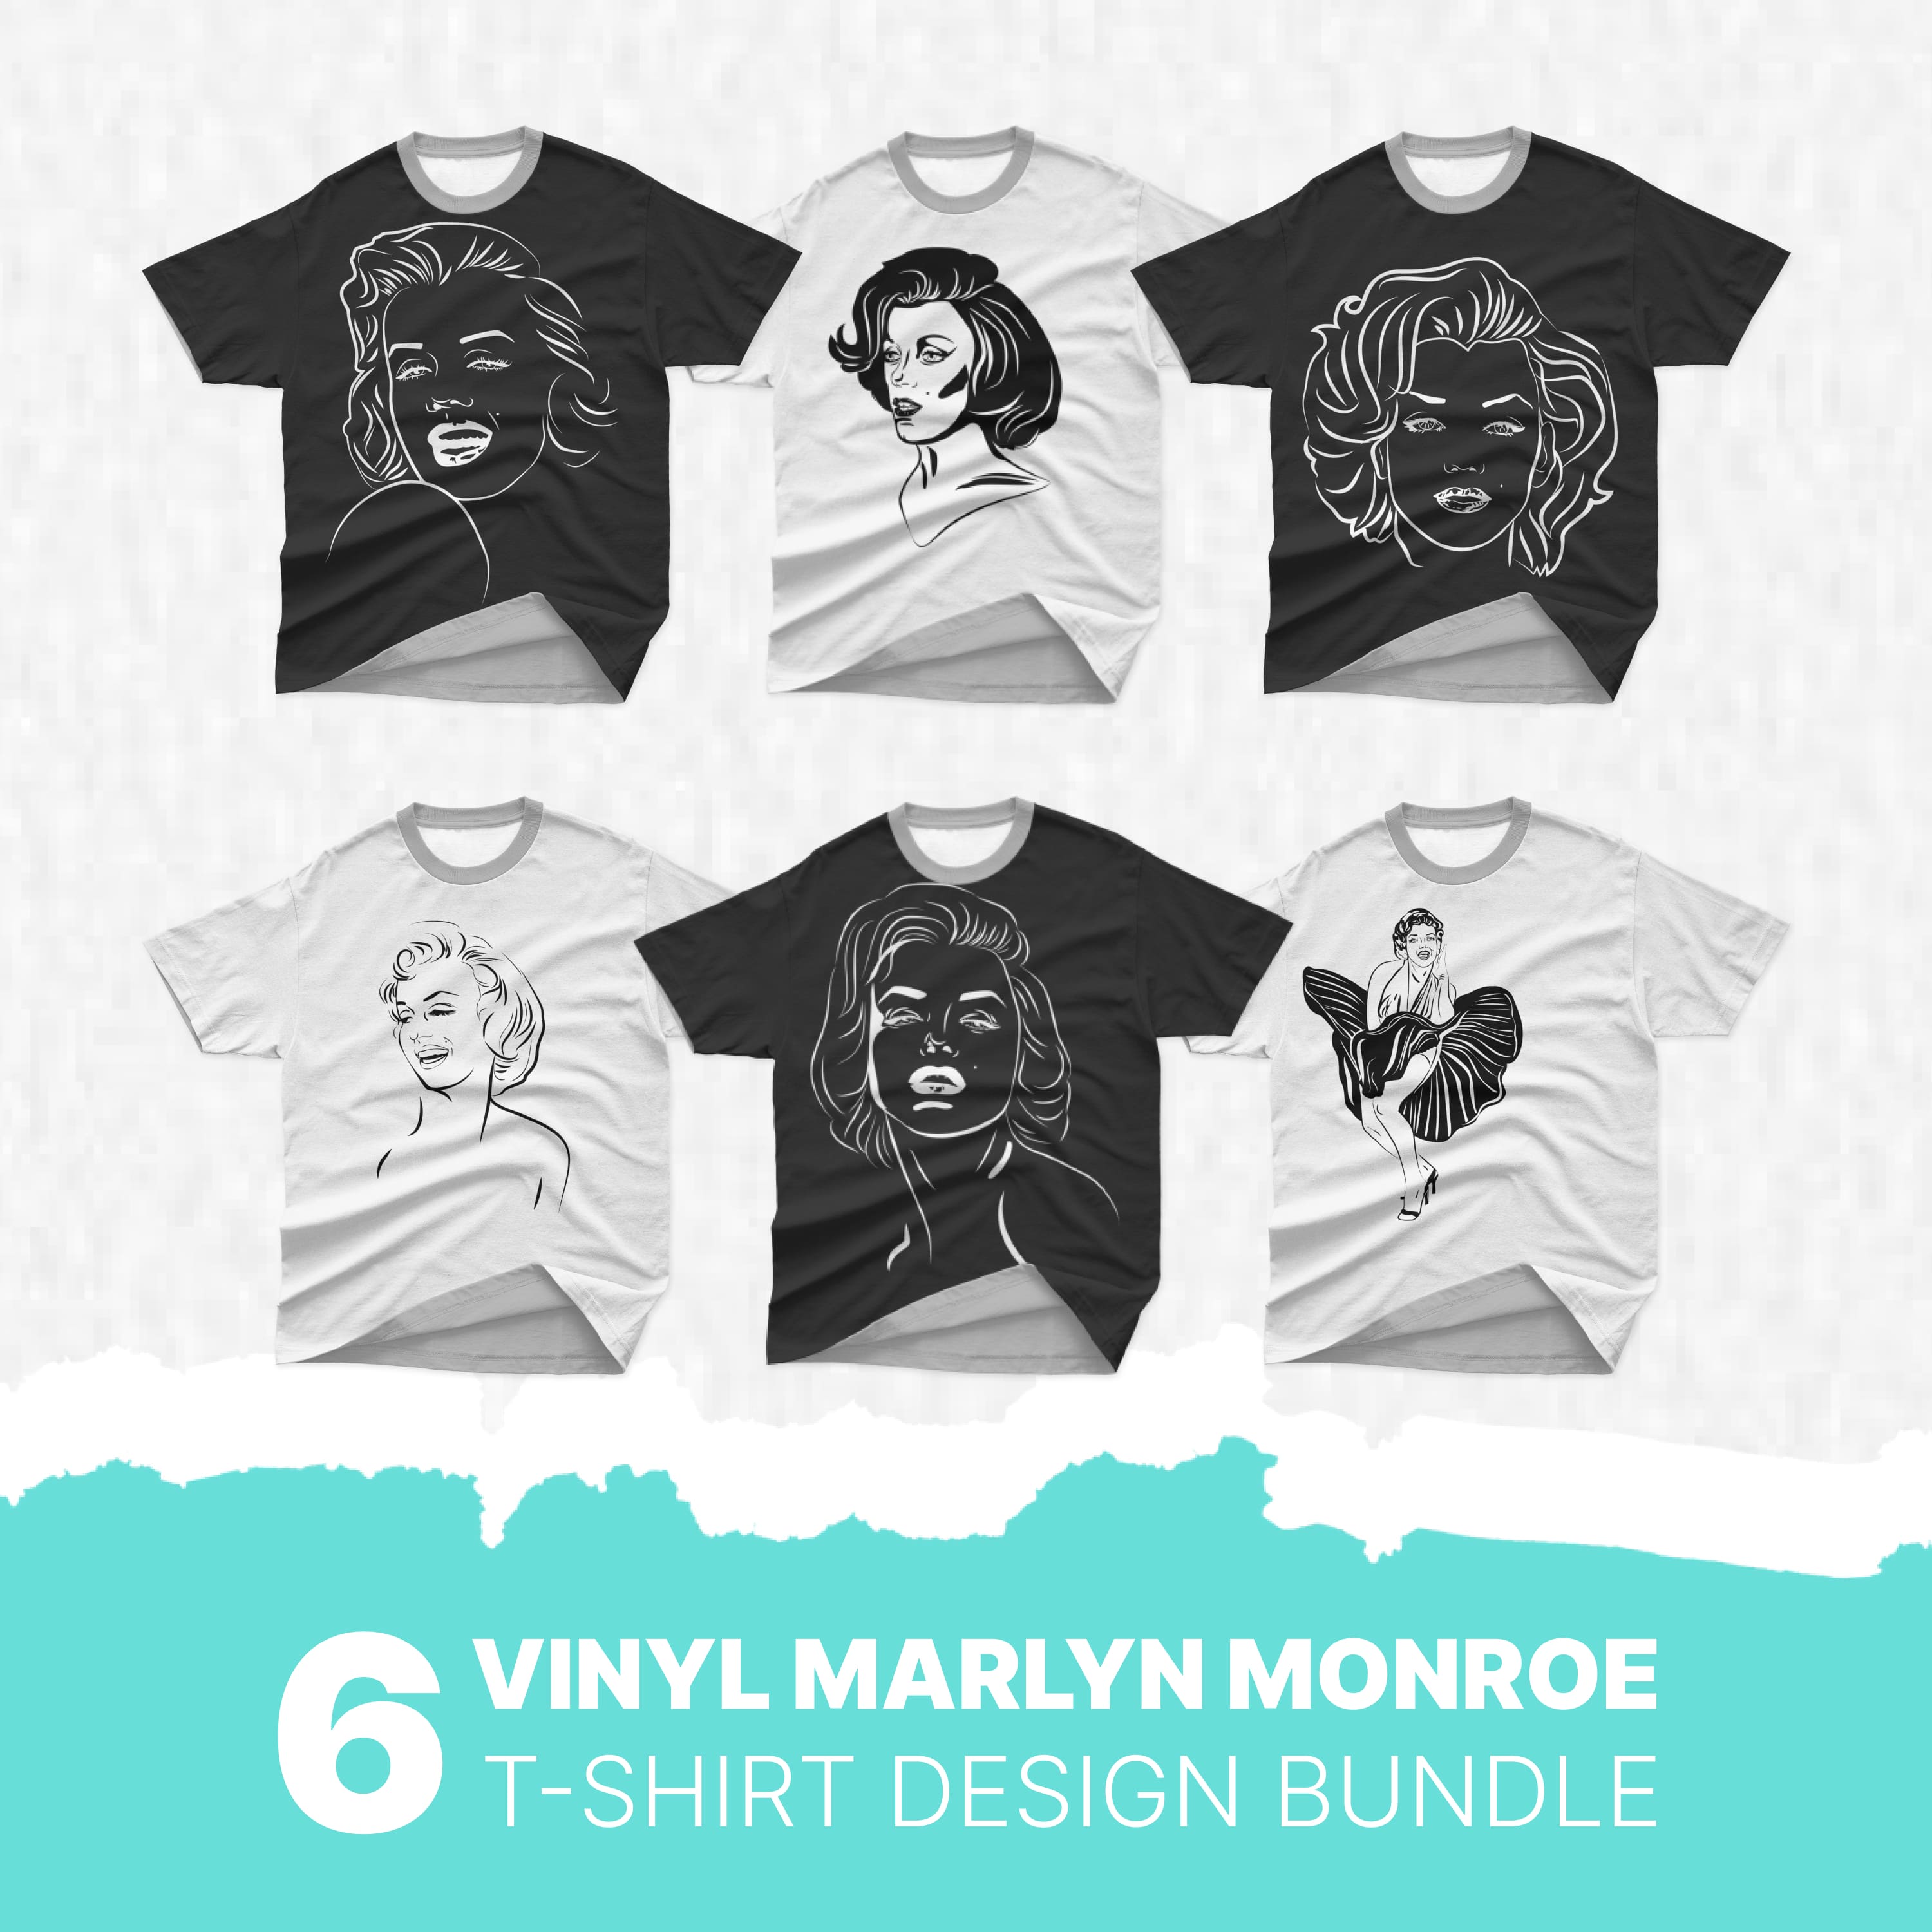 A set of t-shirt images with amazing Marilyn Monroe vinyl print.